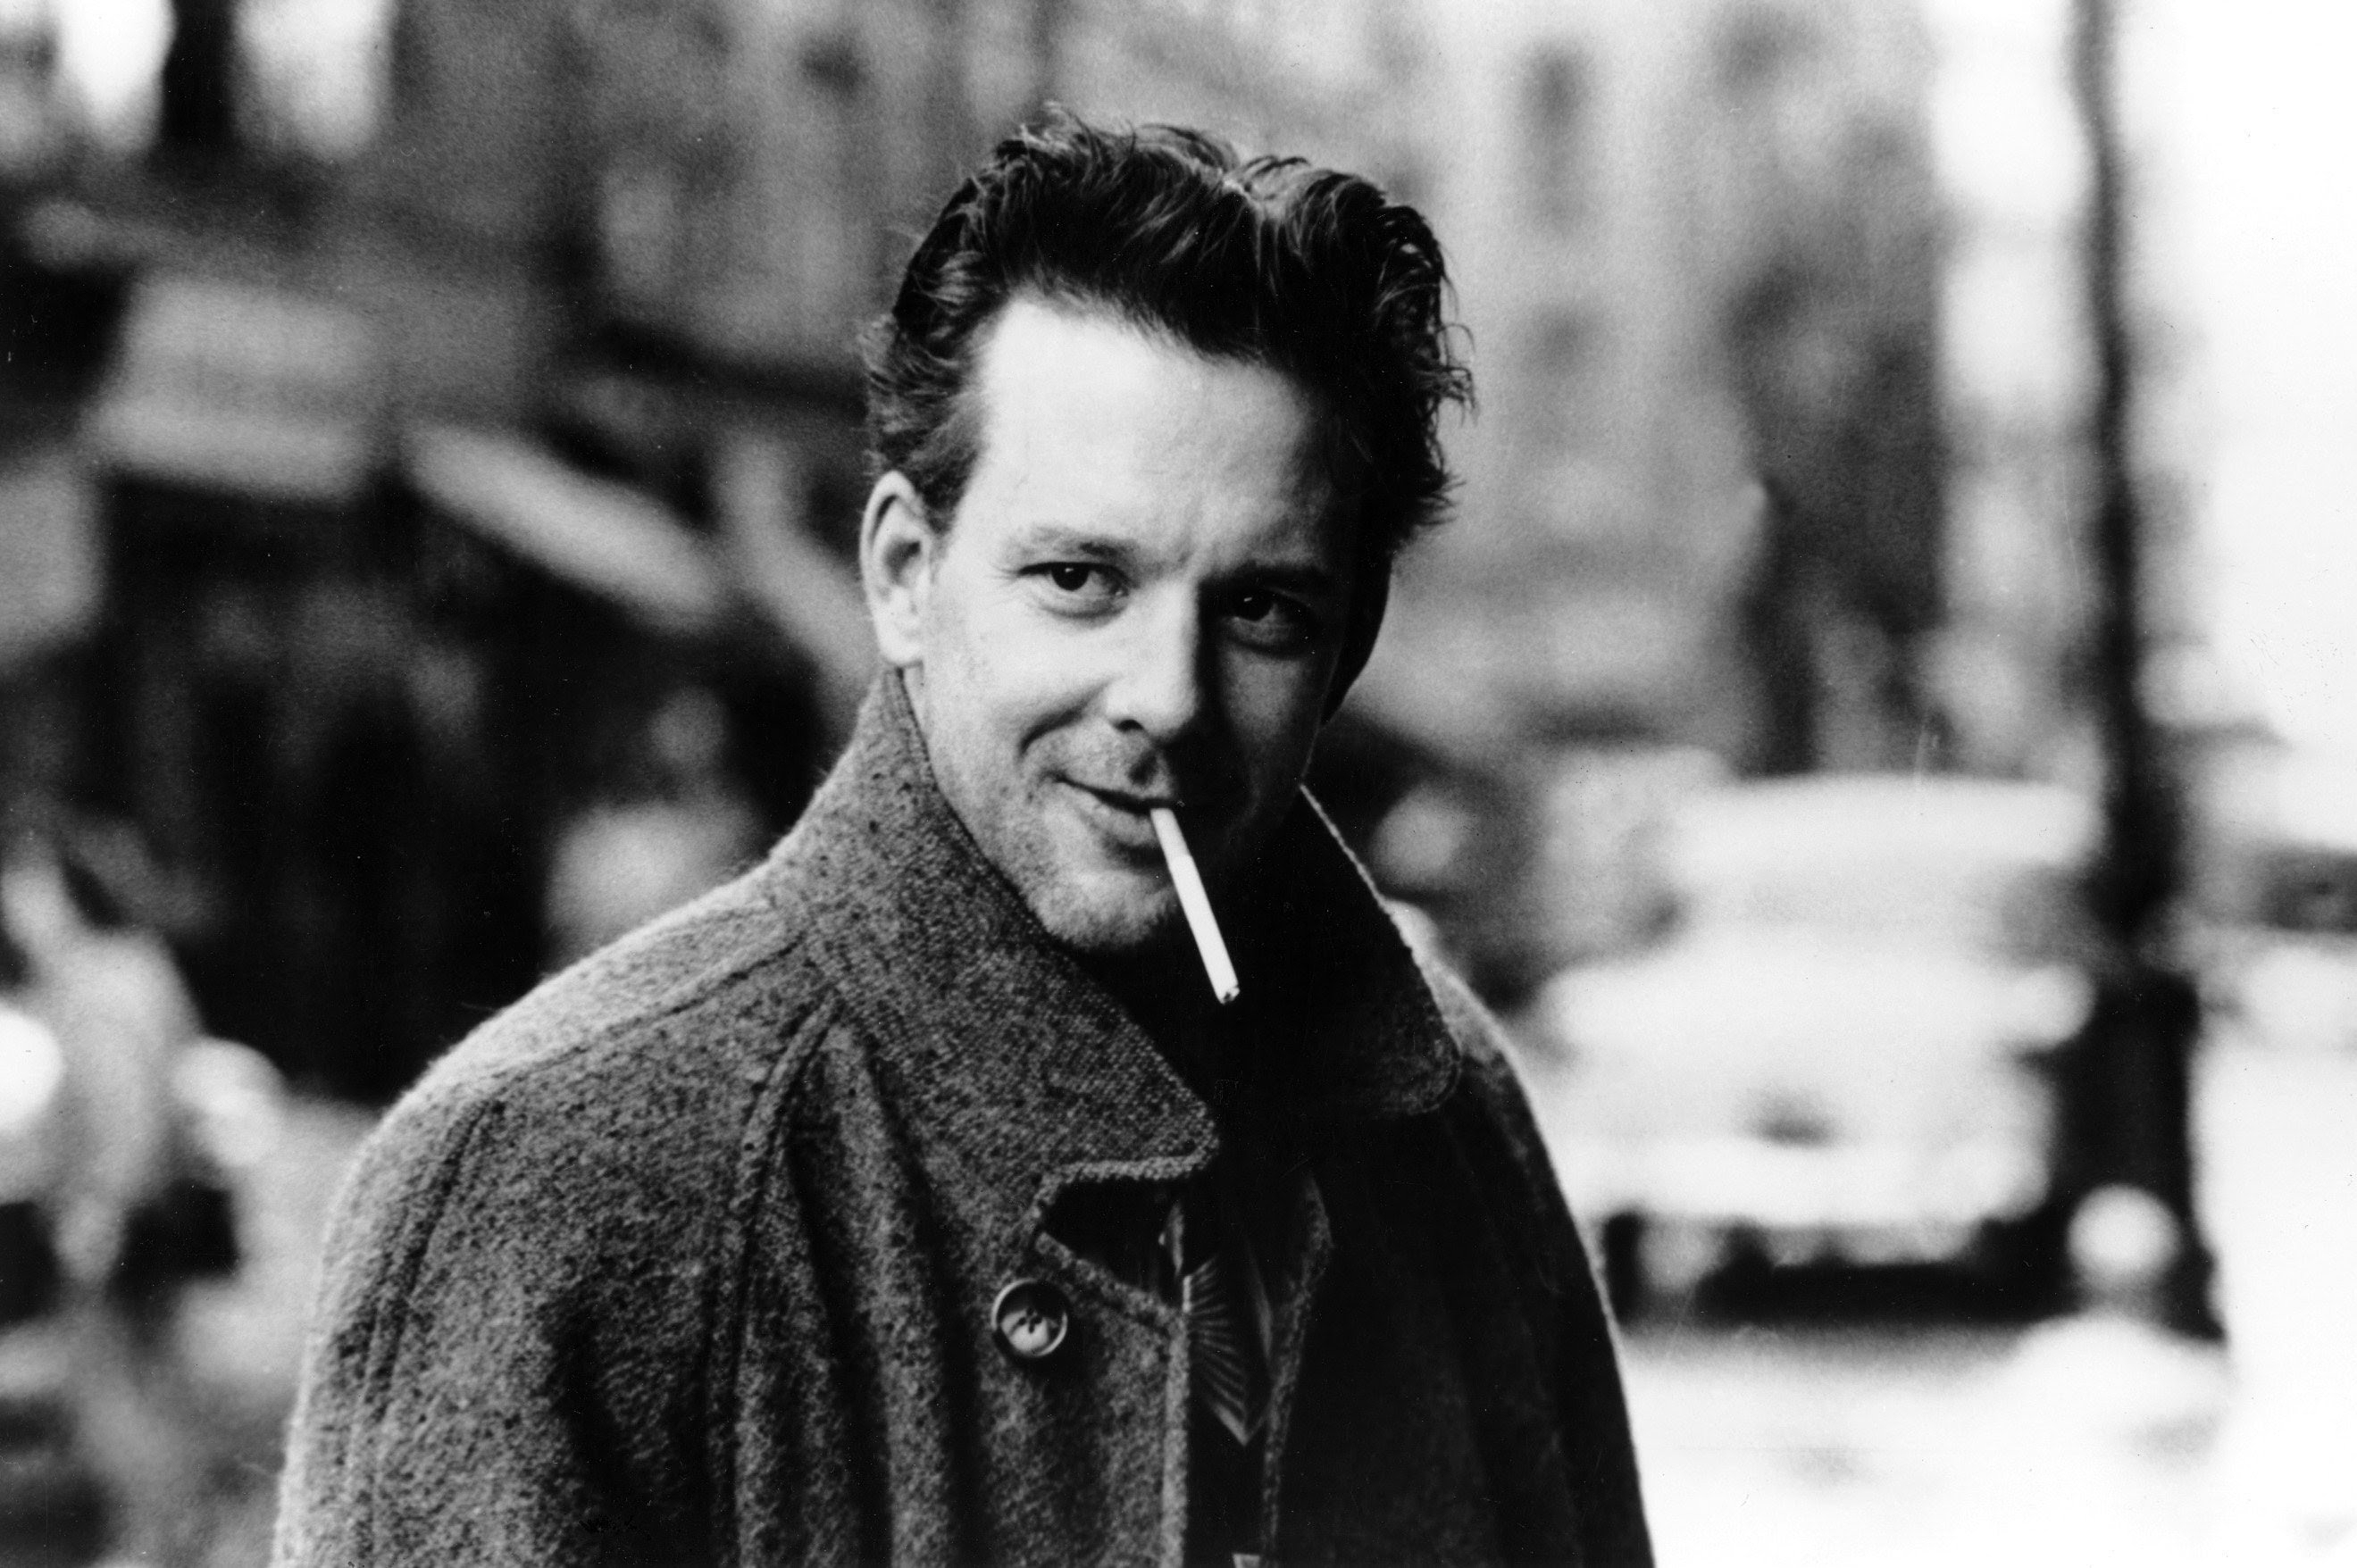 Mickey Rourke Wallpaper Image Photo Picture Background